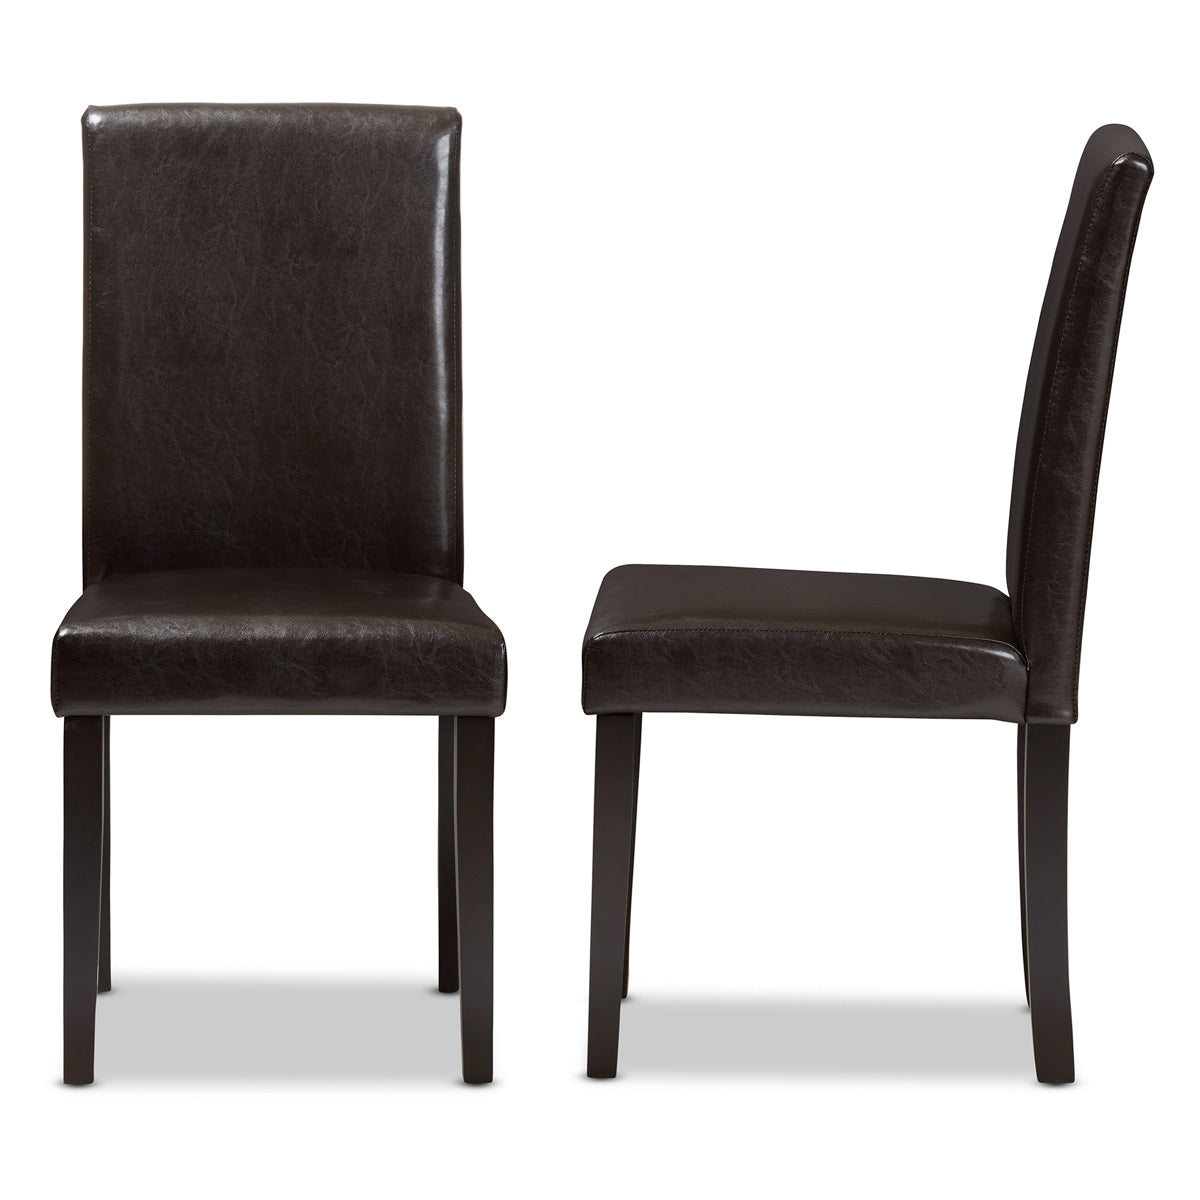 Baxton Studio Mia Modern and Contemporary Dark Brown Faux Leather Upholstered Dining Chair (Set of 2) Baxton Studio-dining chair-Minimal And Modern - 3